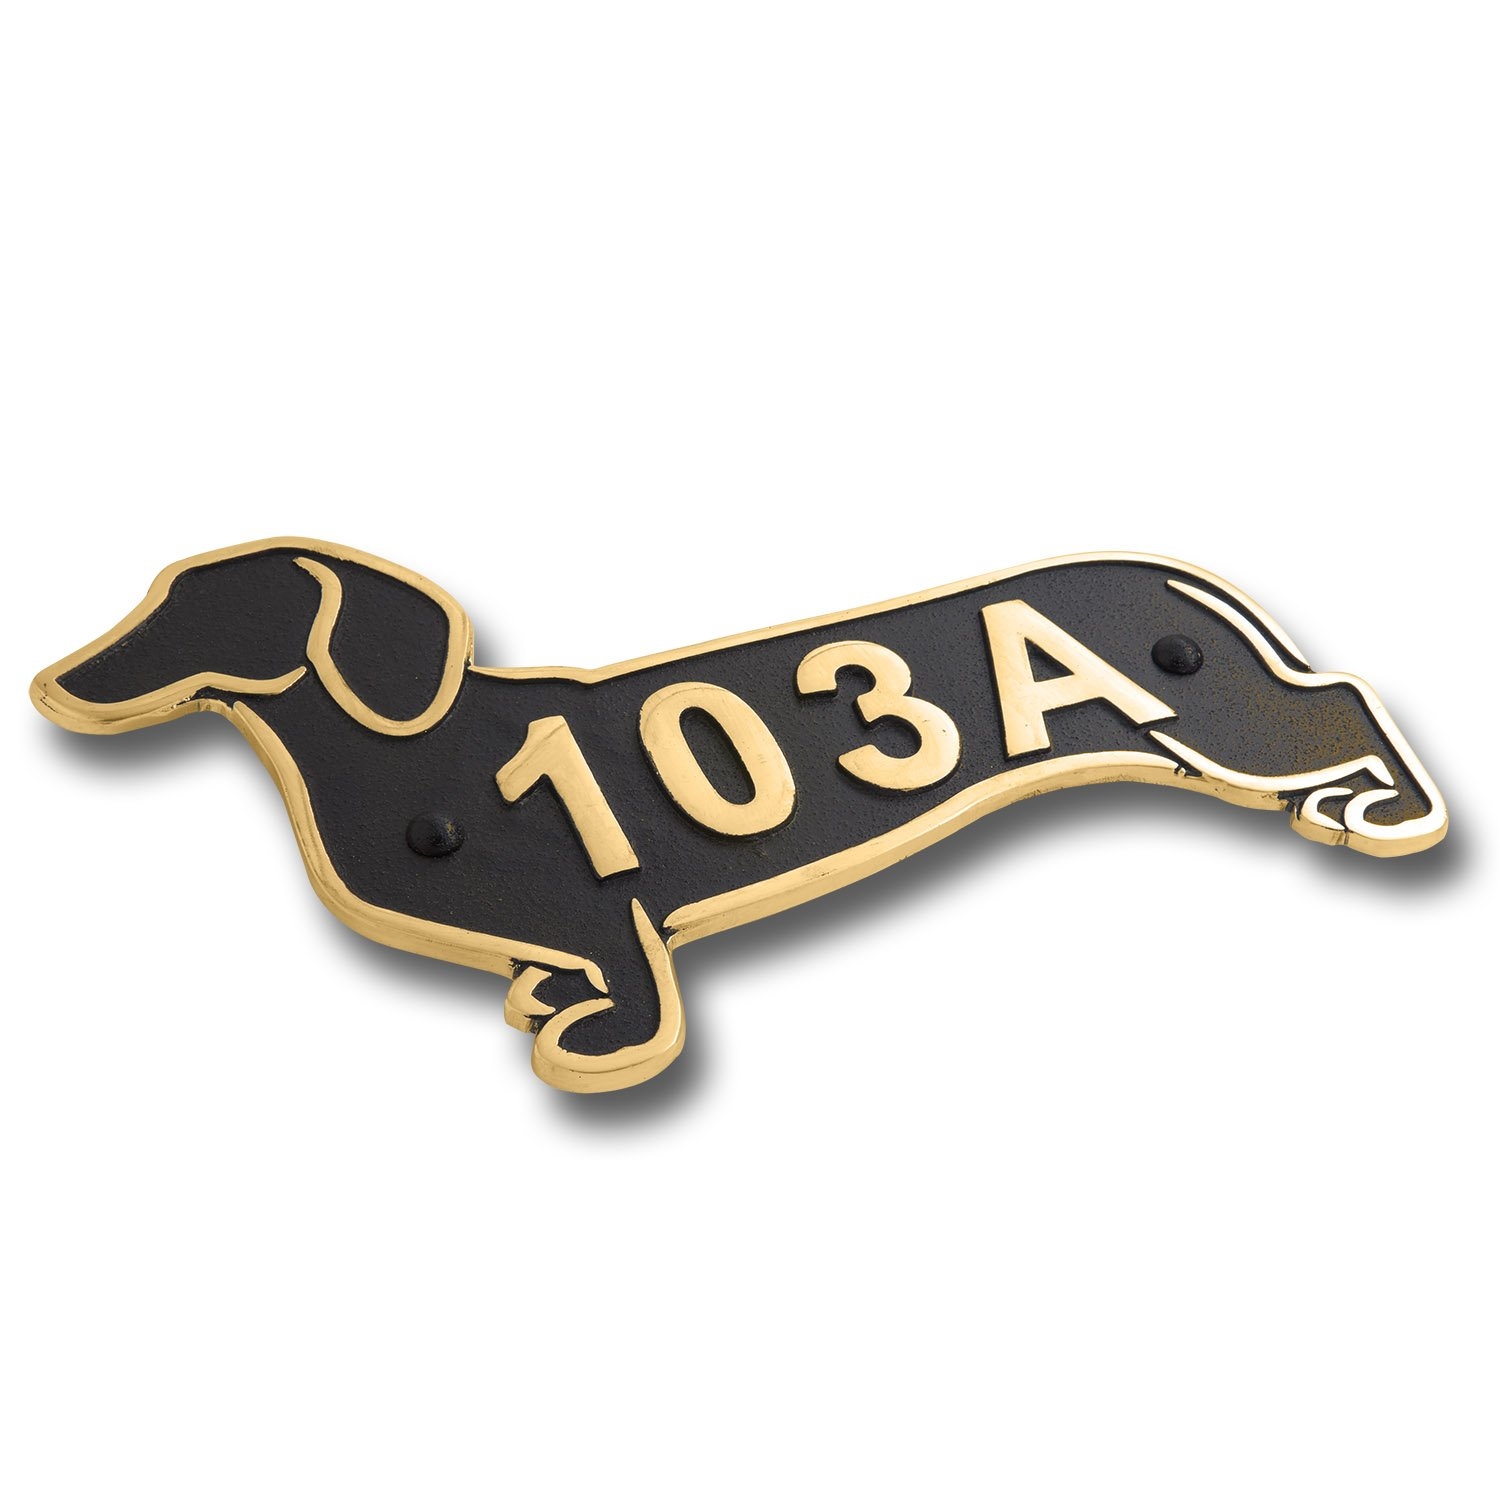 Dachshund Metal House Number Address Plaque. Sausage Dog Gift Idea For A Dachshund Owner. Yard Or Garden Dachshund Décor Makes A Great Gift For Him Or Her – Aluminium & Purple